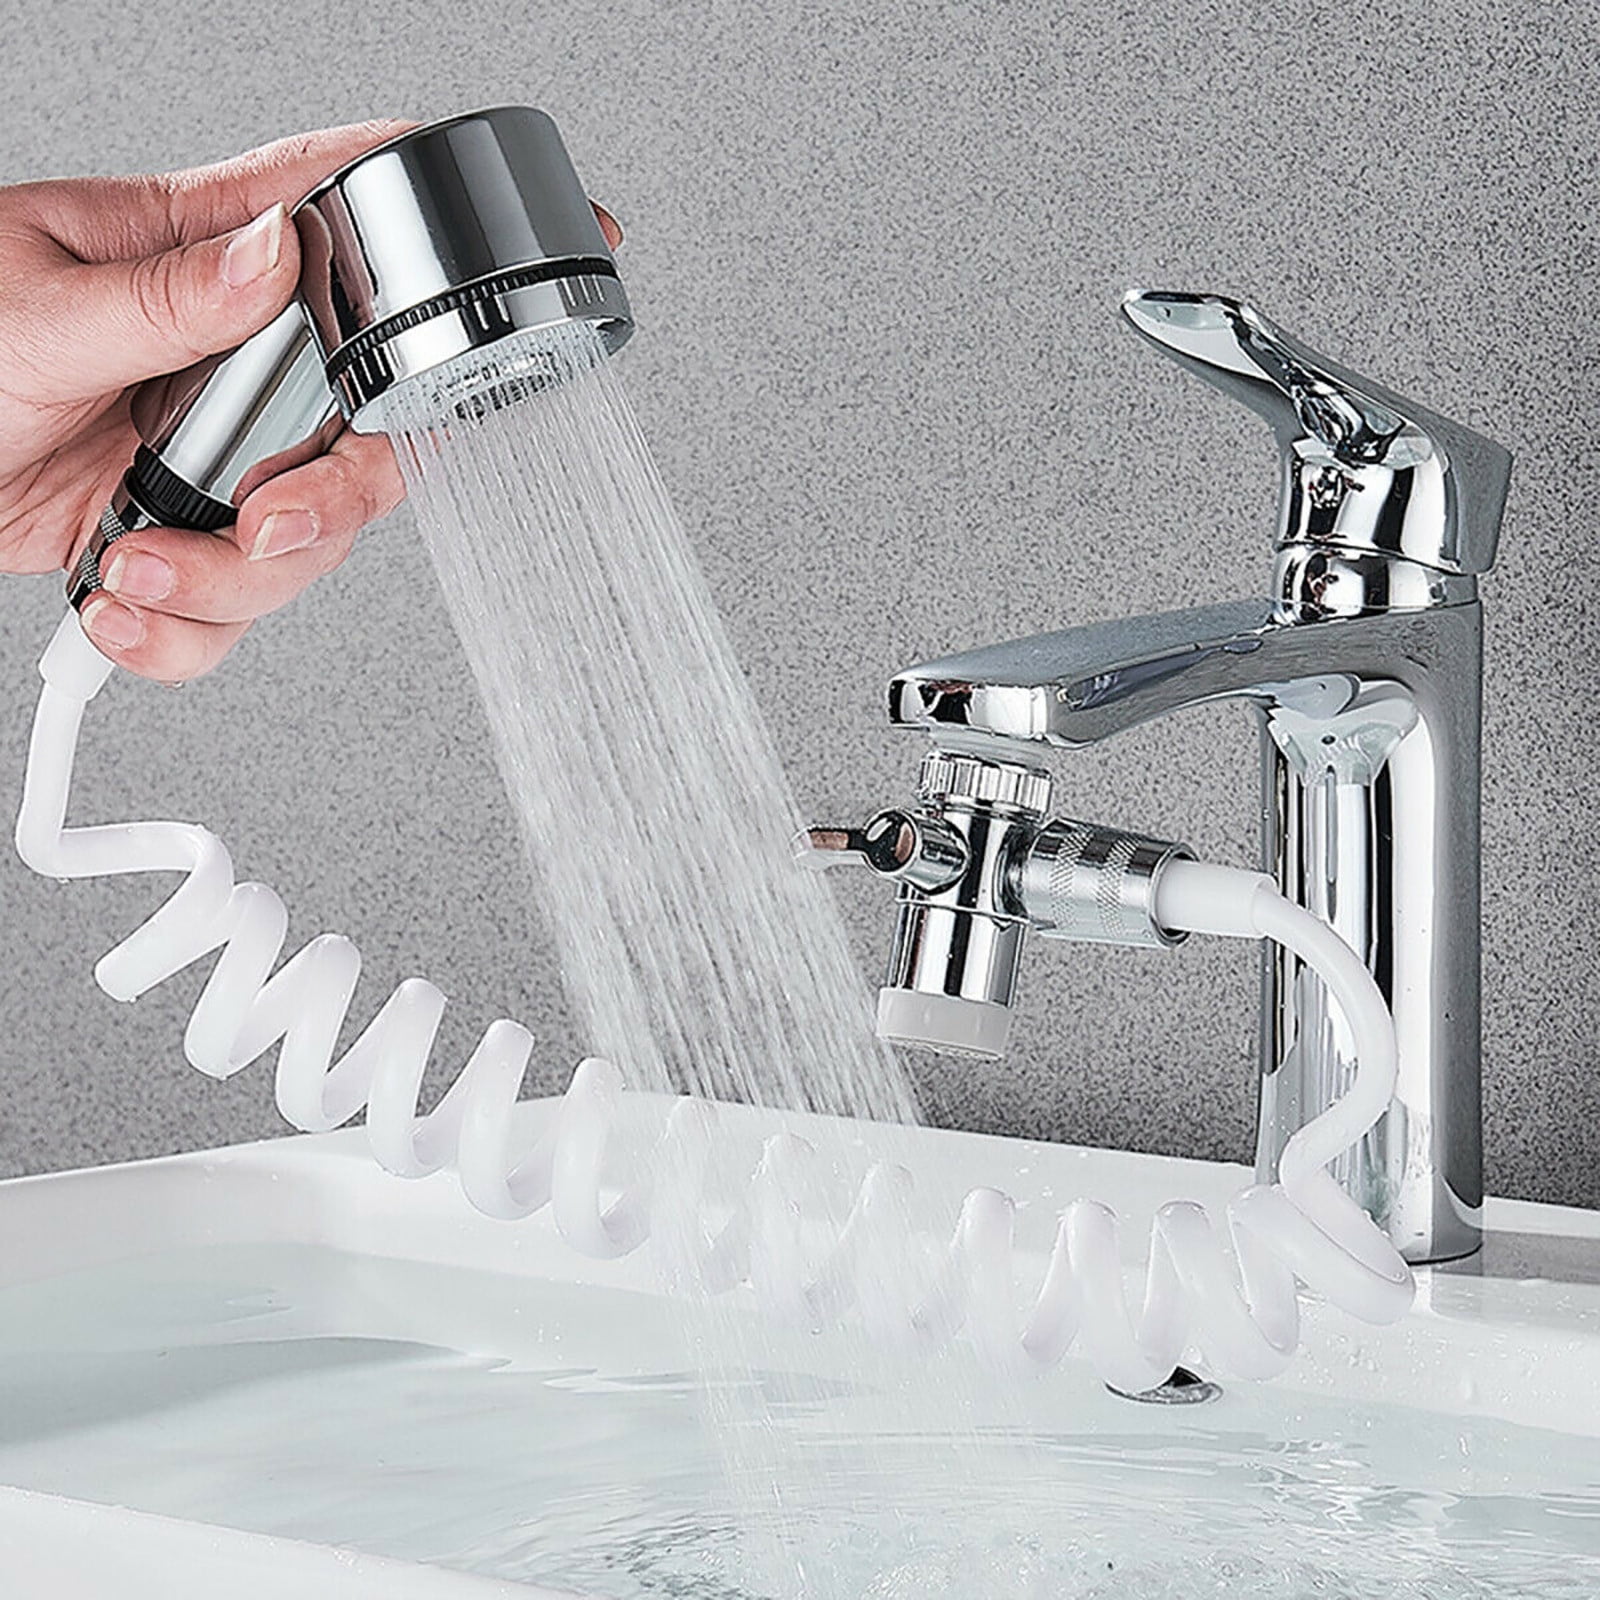 Faucets Accessories Bathroom Wash Face Basin Water Tap External Shower Head Flexible Hair Washing Pet Clean Faucet Rinser Extension Set Two Gears Adjustable Shower Water Flow 